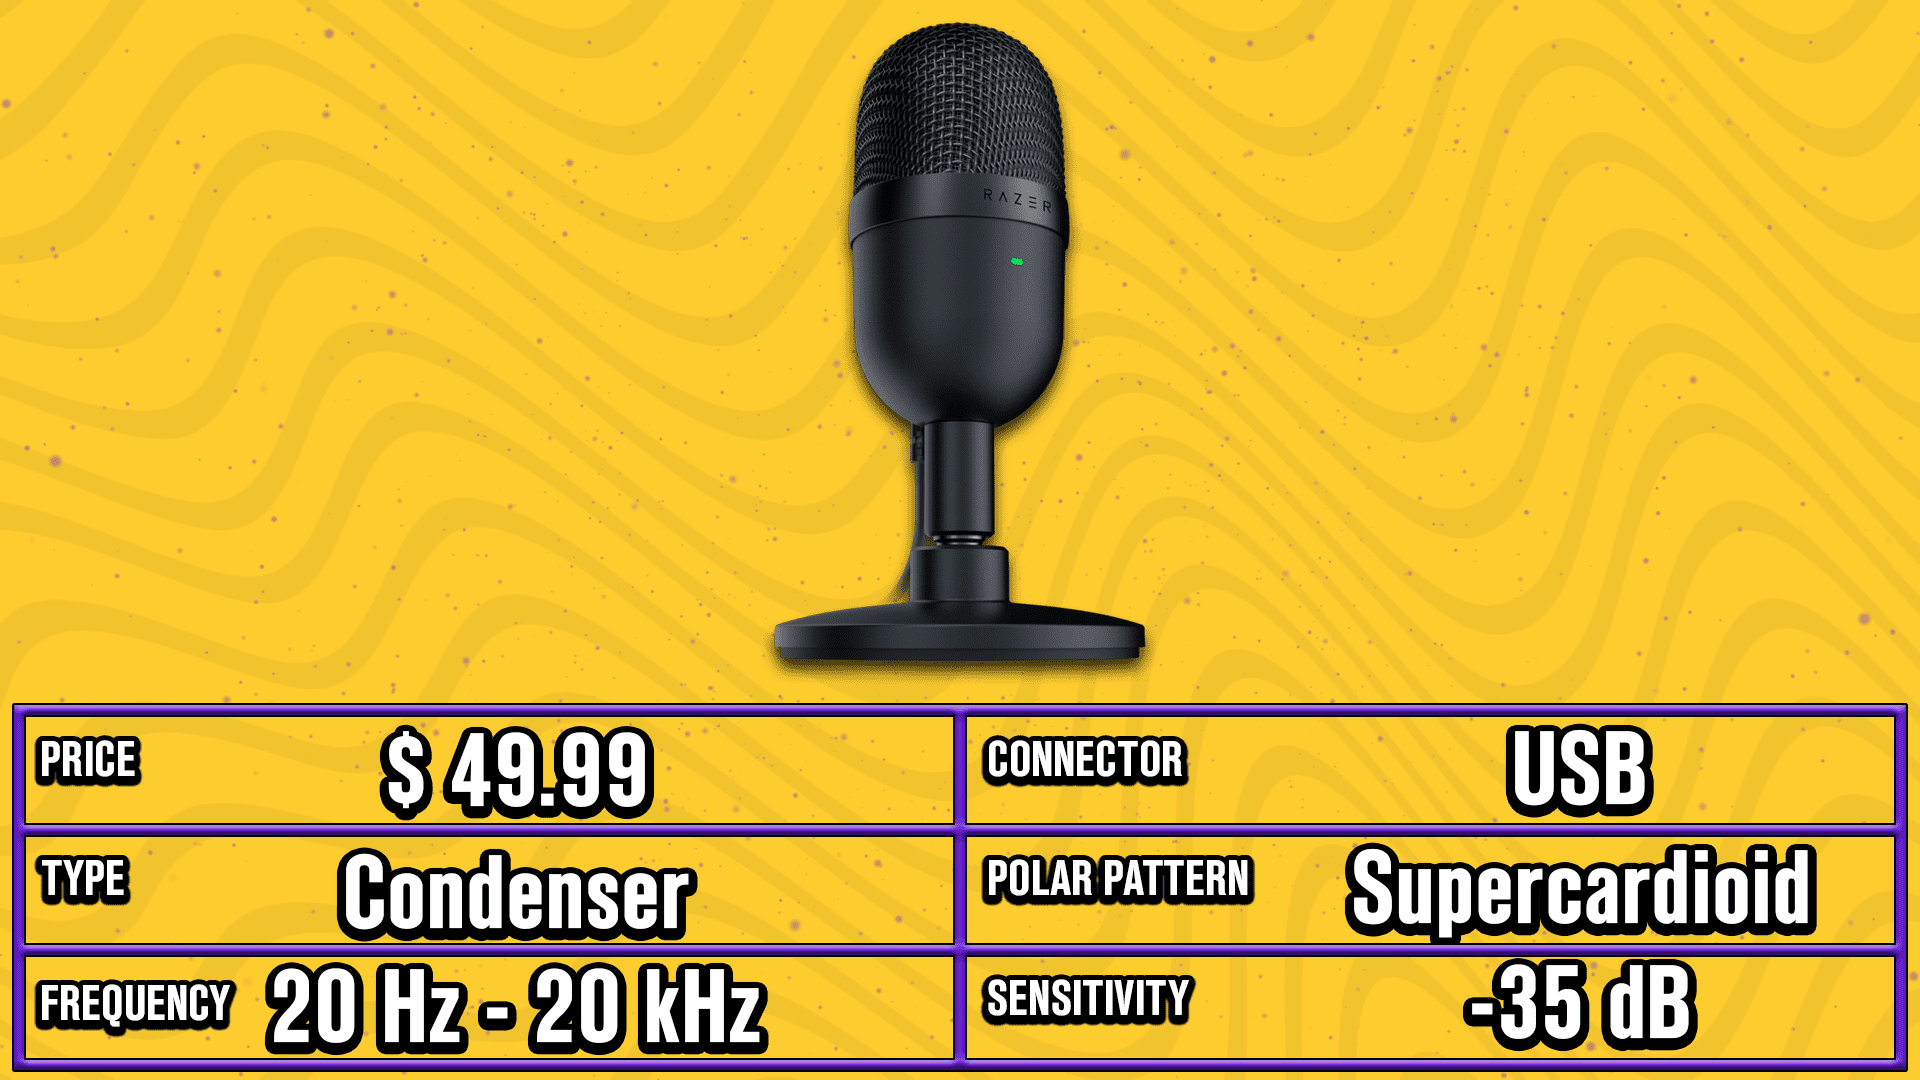 BEST MICROPHONE For Singing/Streaming UNDER $50 On !! 